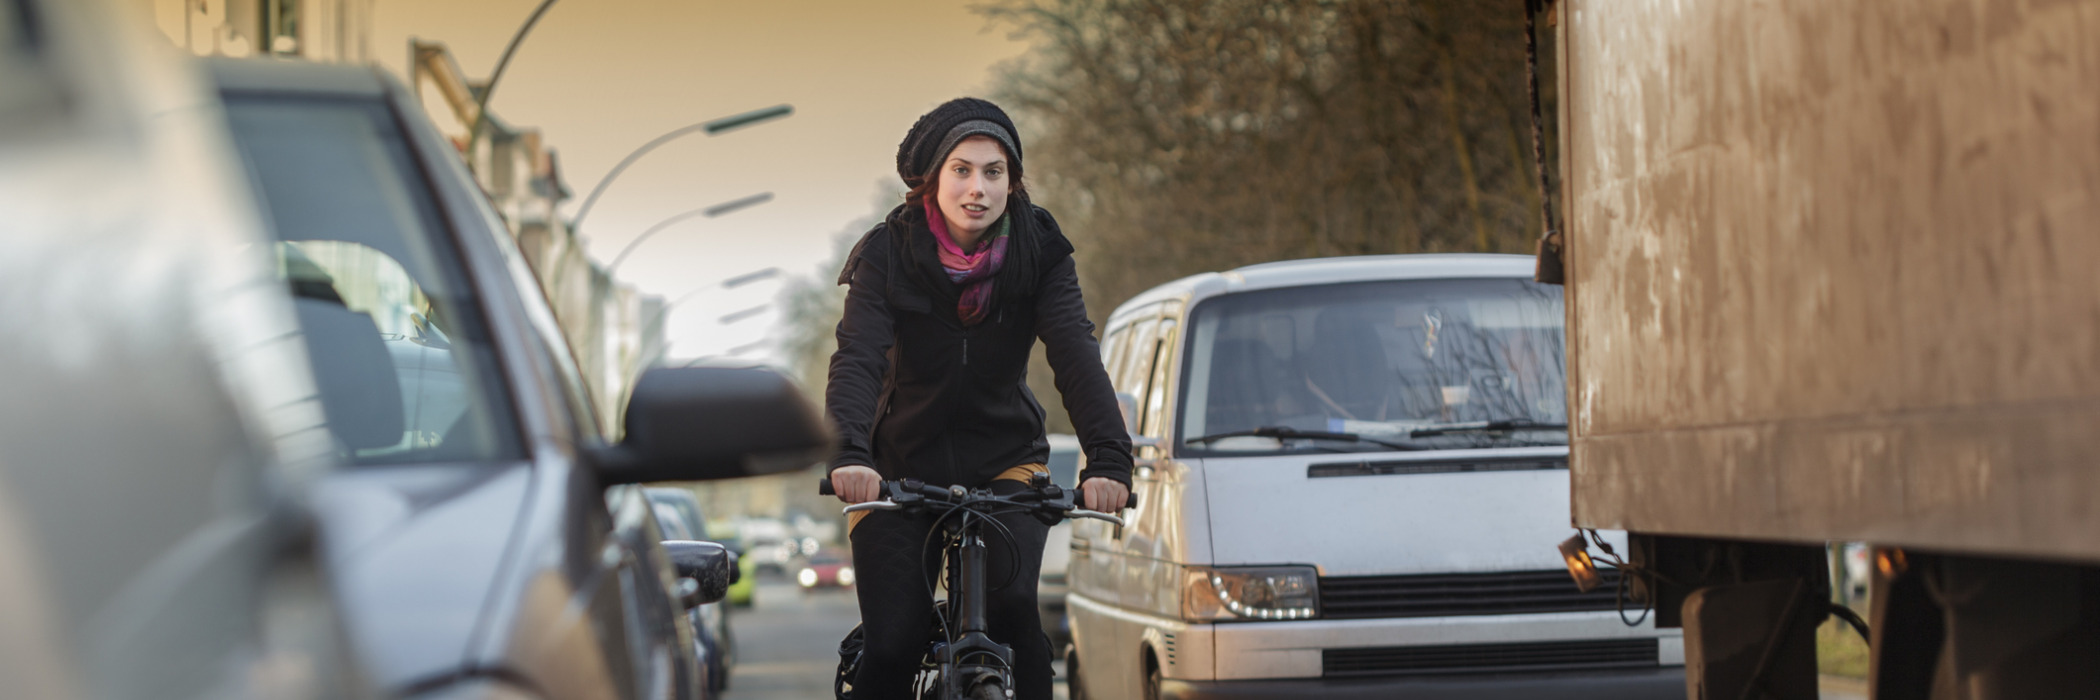 How dangerous is air pollution for my health? Many cyclists in German cities ask themselves the same question.